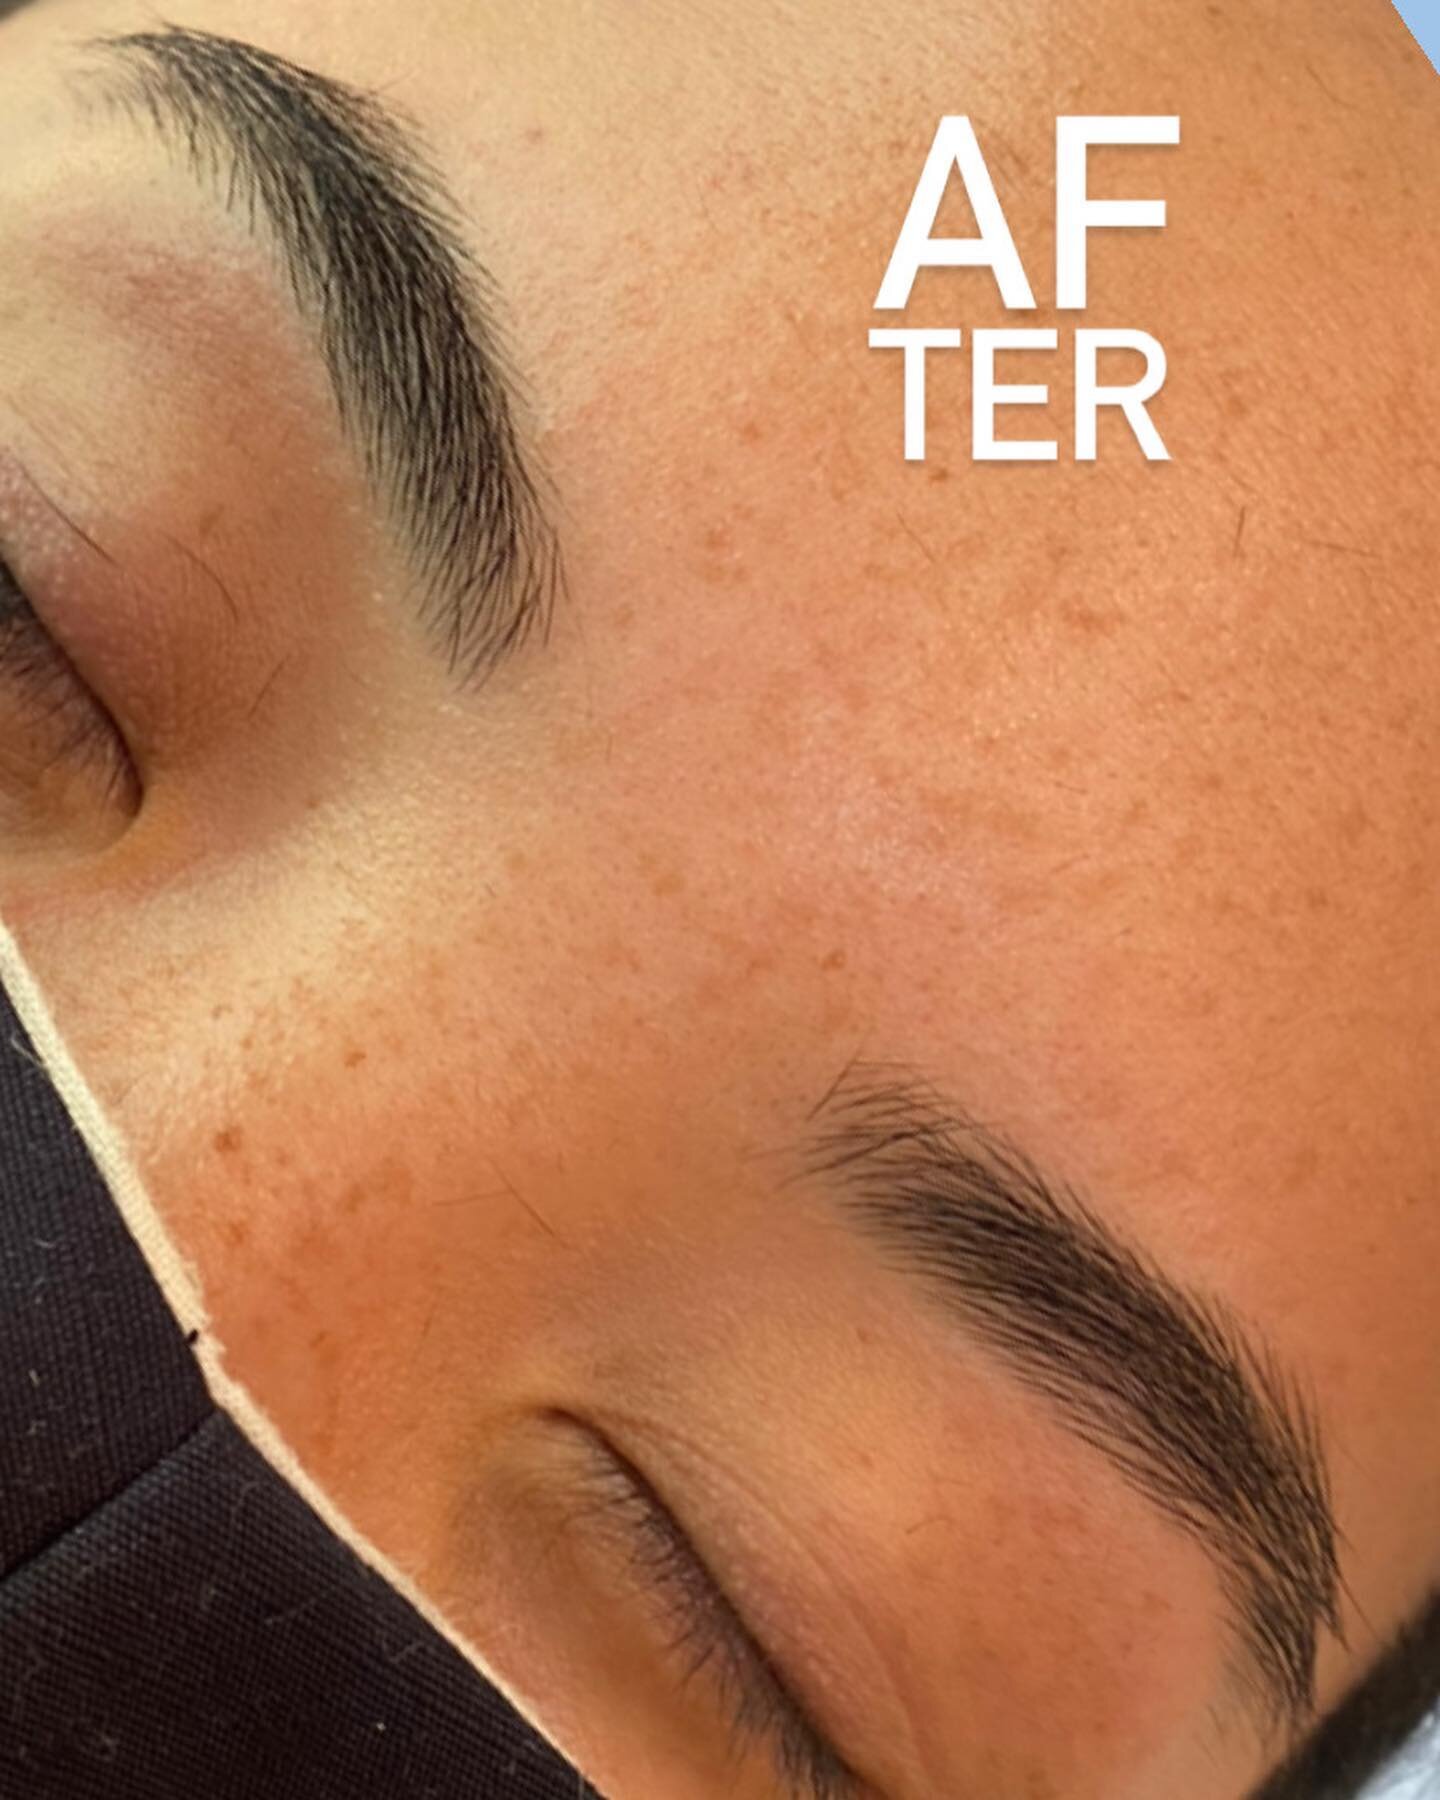 Covid Silver lining? Clients who committed to leaving their brows to reset over the past few months. The result? The brows we&rsquo;ve been aiming for 😍